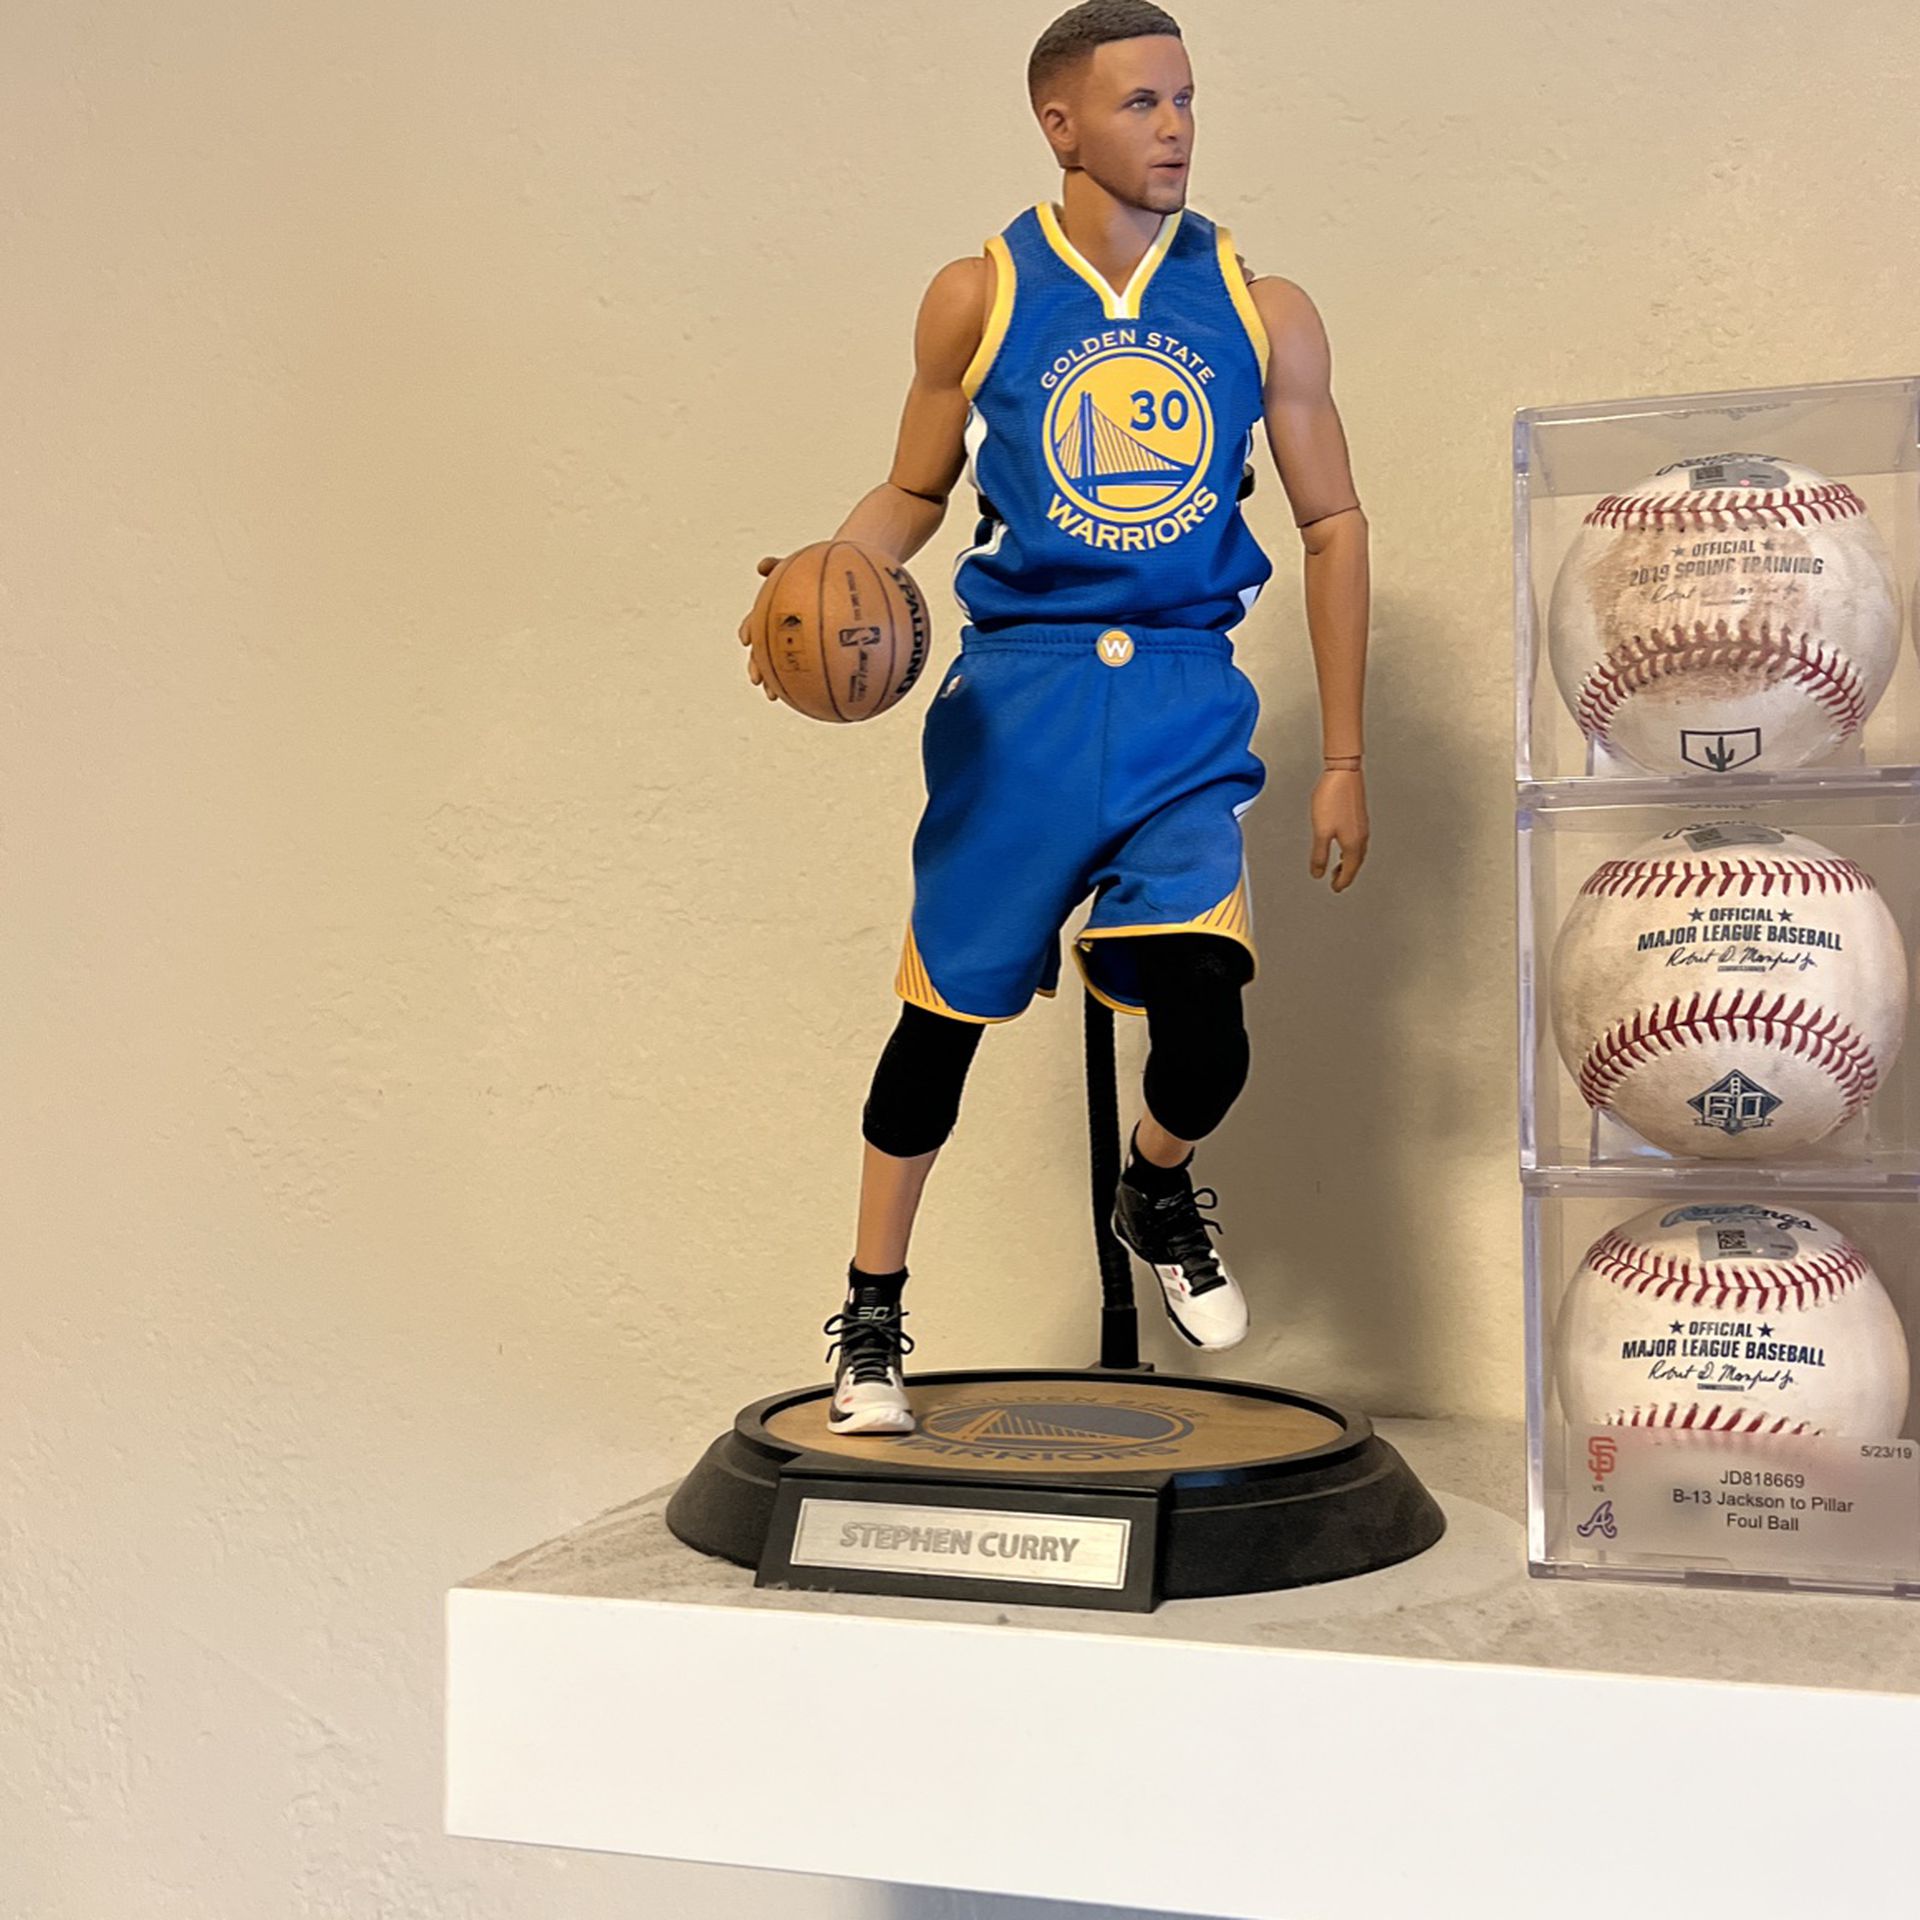 Custom 1/6 Stephen Curry Golden State Warrior jersey TOYs 30 fit enterbay